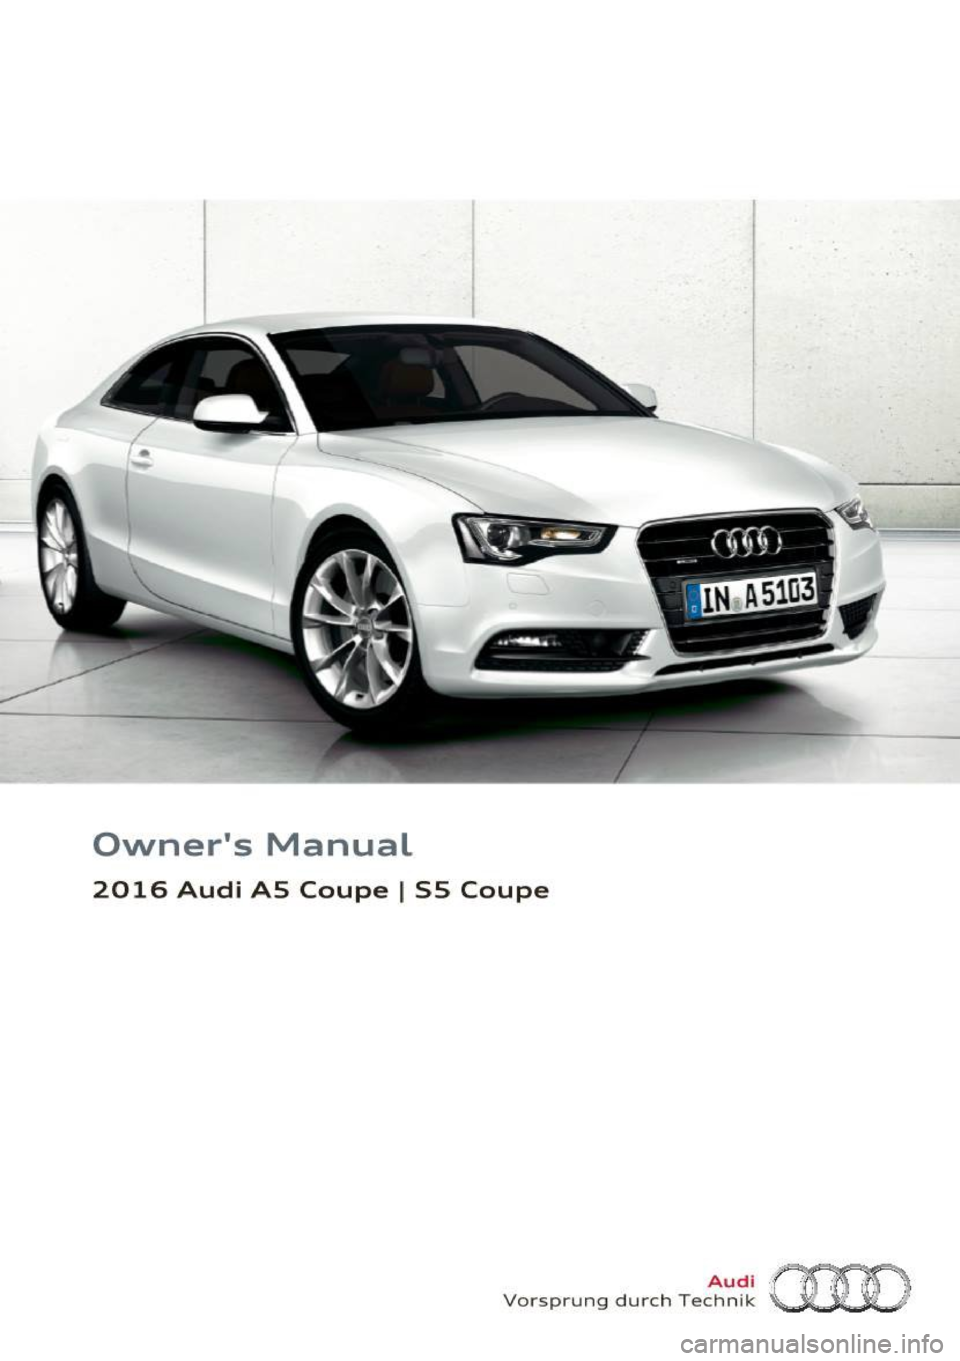 AUDI S5 COUPE 2016  Owners Manual Owners  Manual 
2016  Audi  AS  Coupe I S5  Coupe 
Vorsprung  durch Te~~?~ (HD  